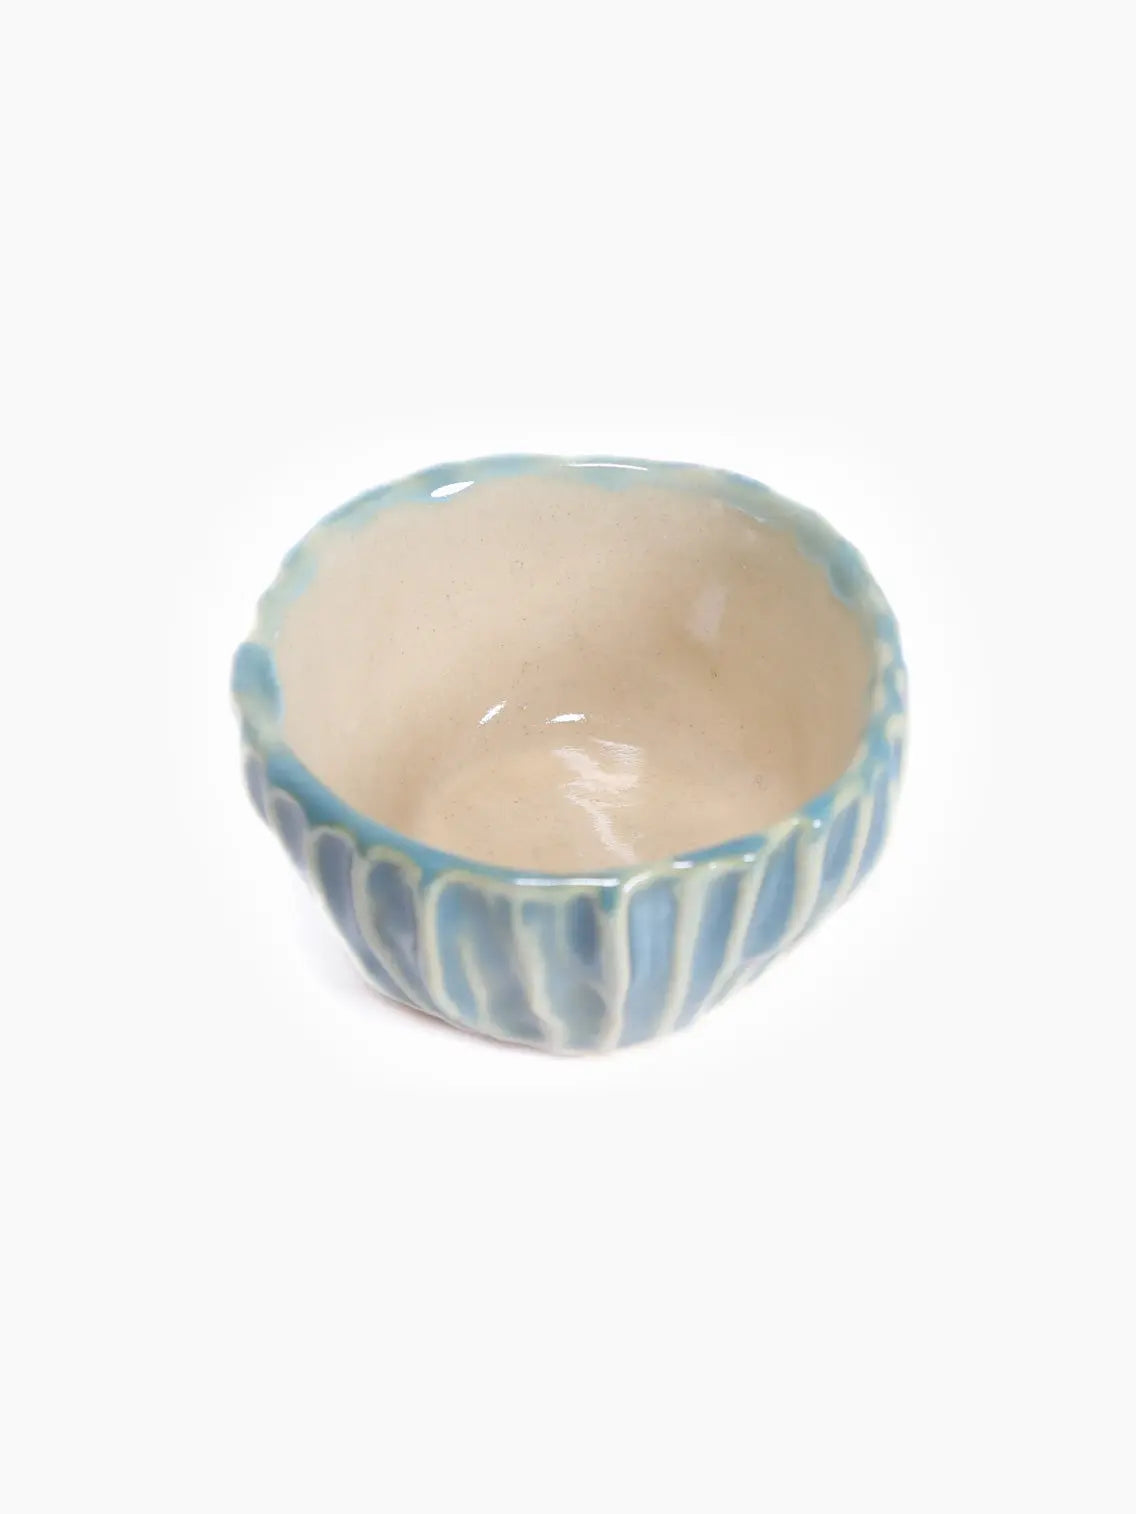 A small, handmade Bol Petit D from ipunto Ceramics is displayed on a white background. The bowl features a textured surface with vertical blue and white striped pattern, giving it a rustic and artisanal appearance reminiscent of Barcelona's charm. The rim of the bowl has a slightly irregular, wavy form.